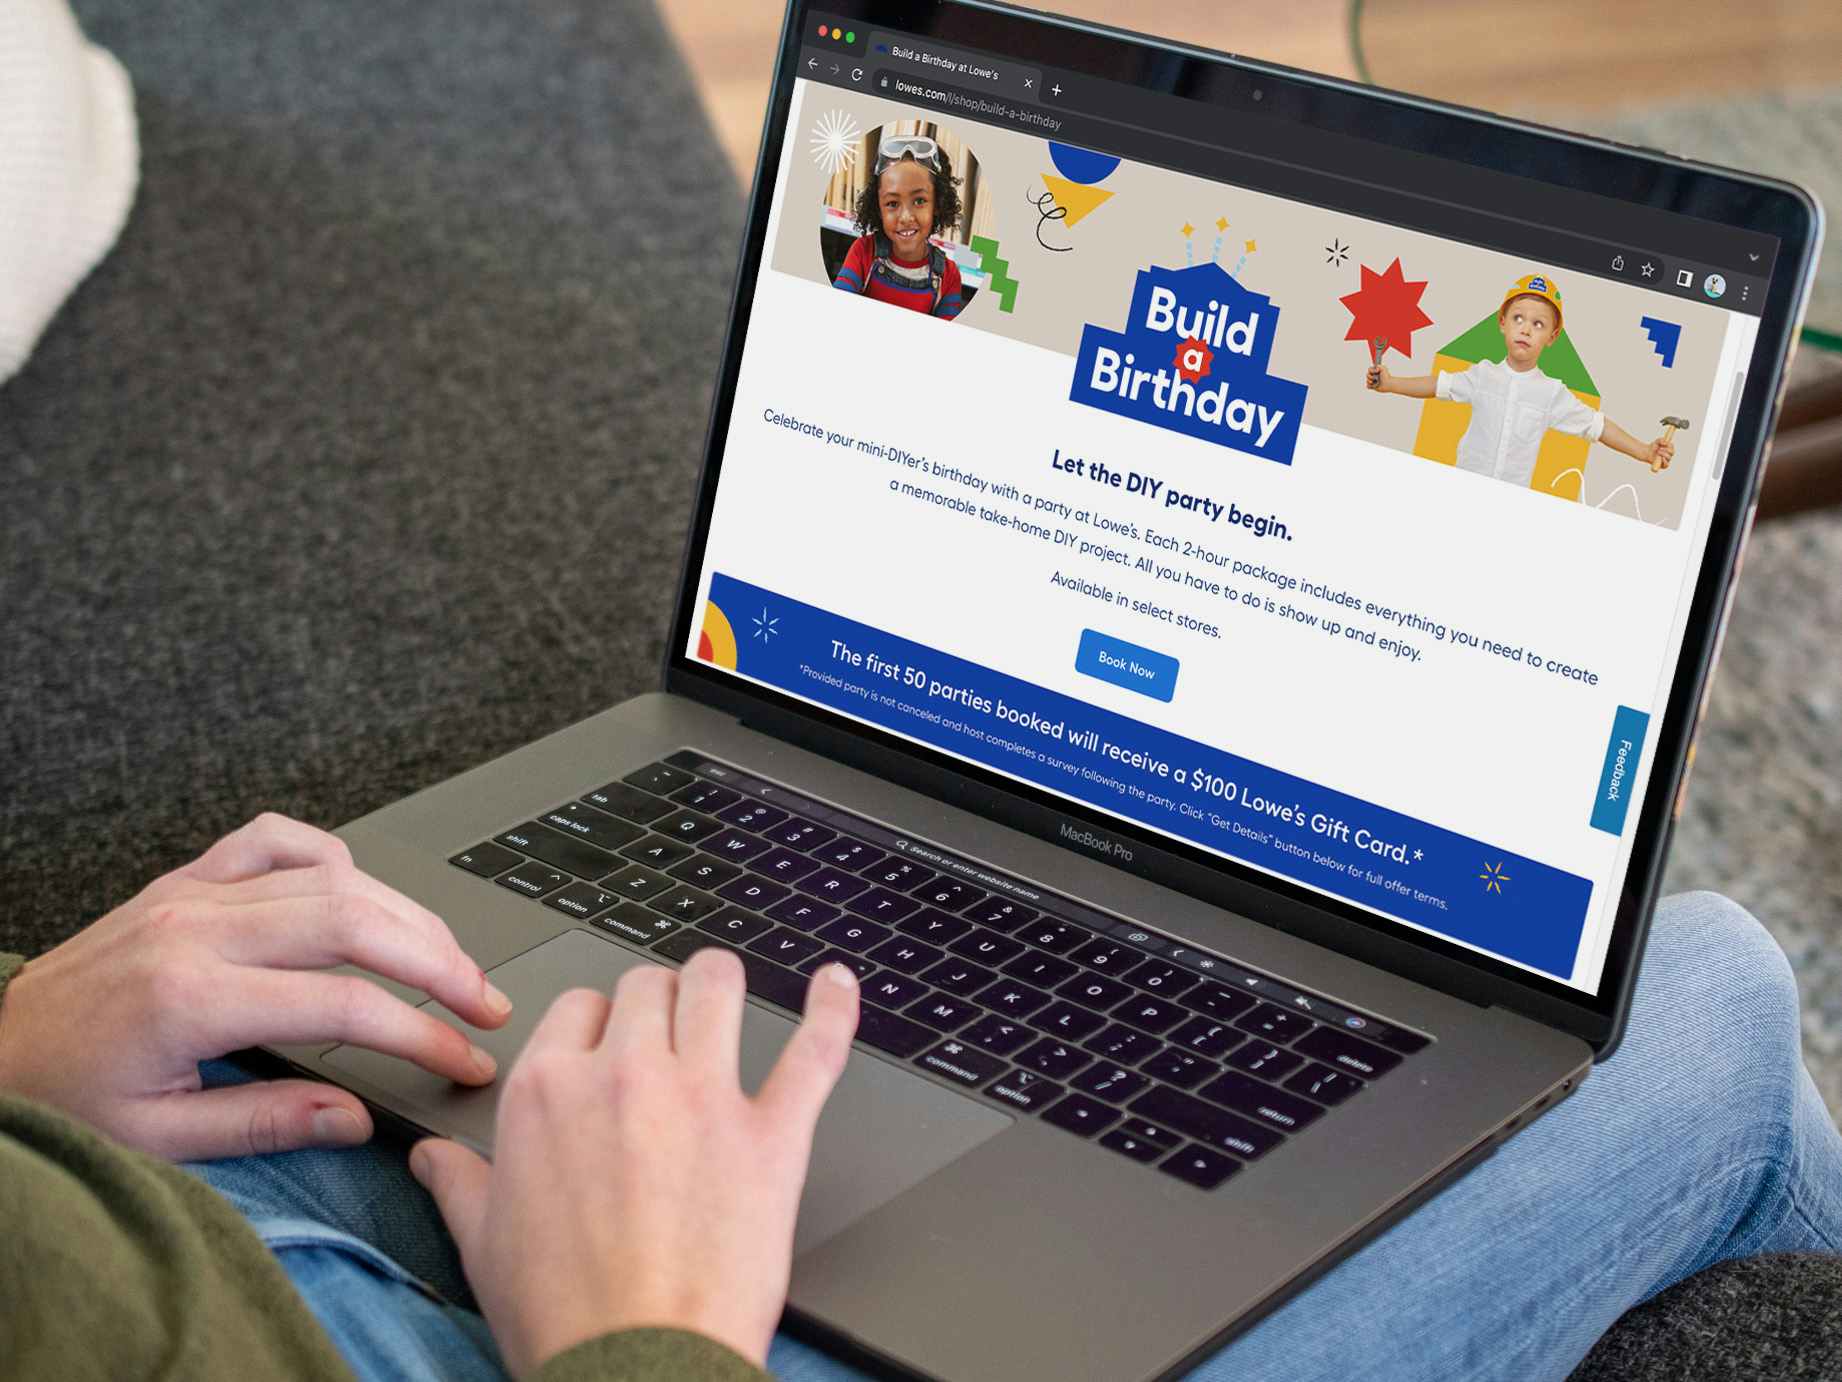 Someone looking on the Lowe's website page about their Build A Birthday party offer